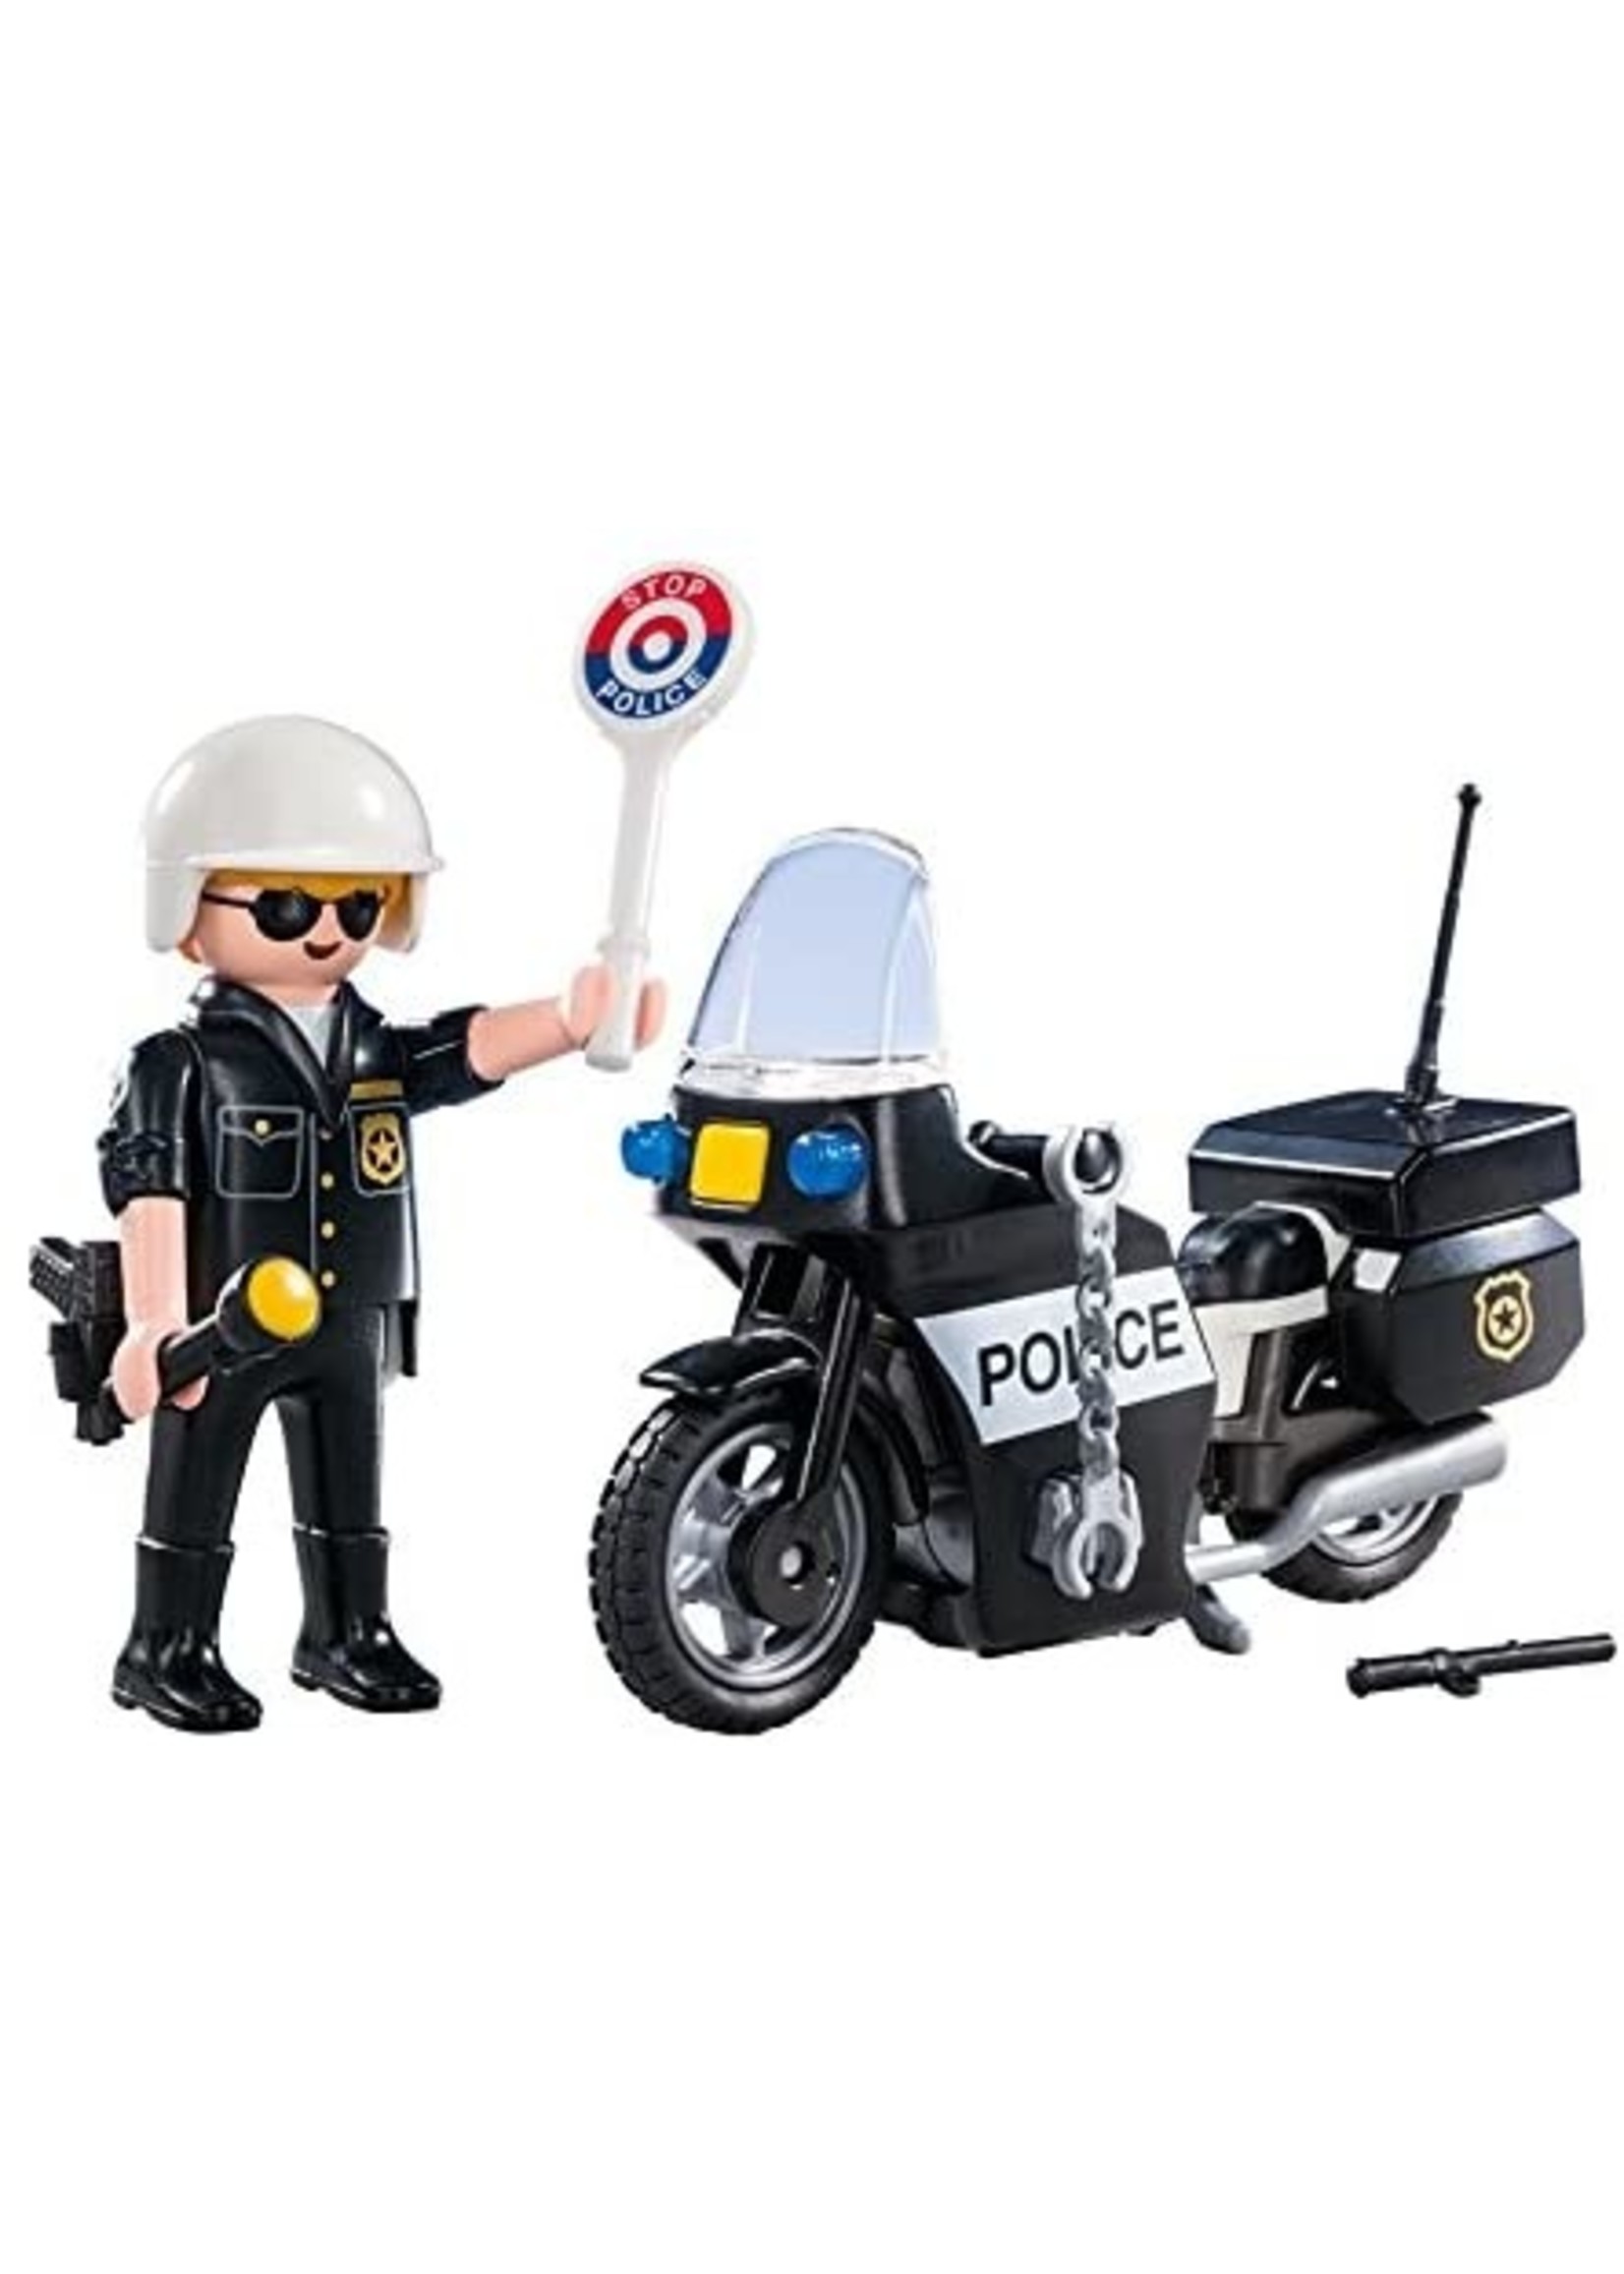 Playmobil 5648 - Carry Case - Police